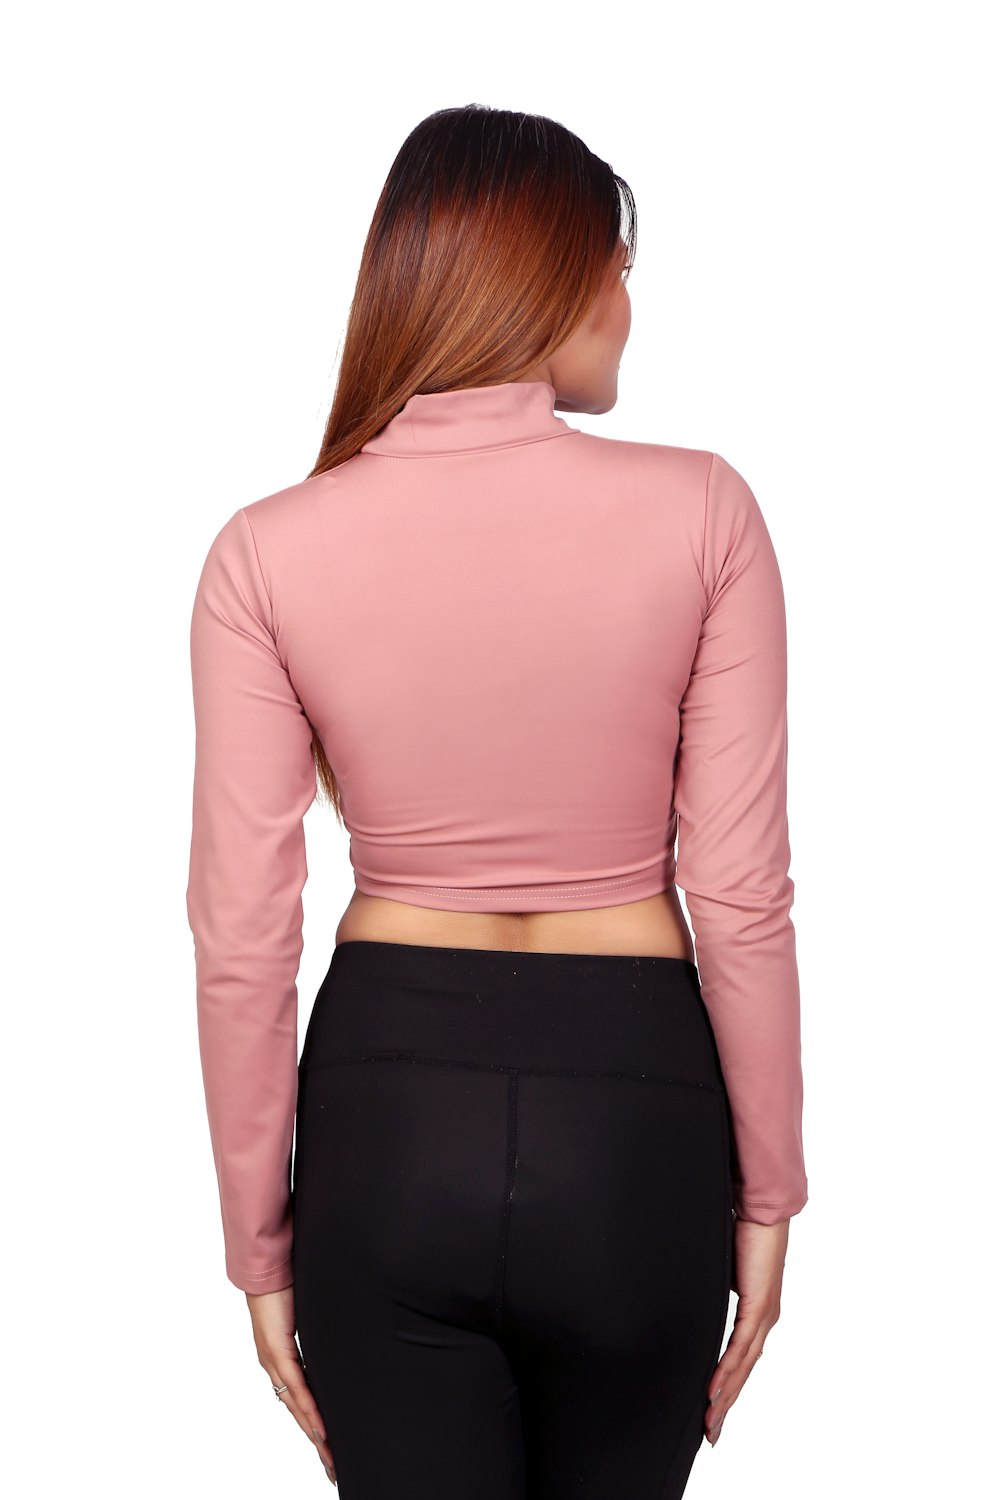 a woman wearing a pink top and black pants